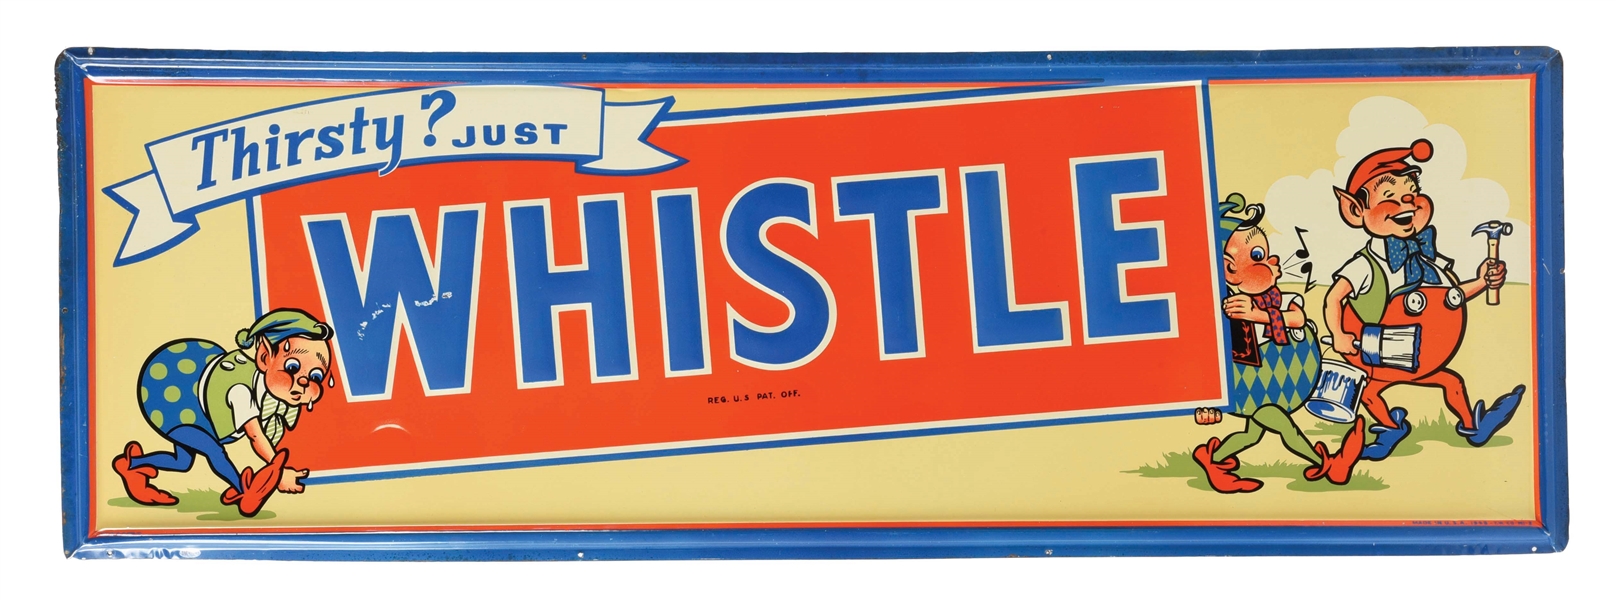 THIRSTY? JUST WHISTLE EMBOSSED TIN SIGN W/ ELF GRAPHICS. 